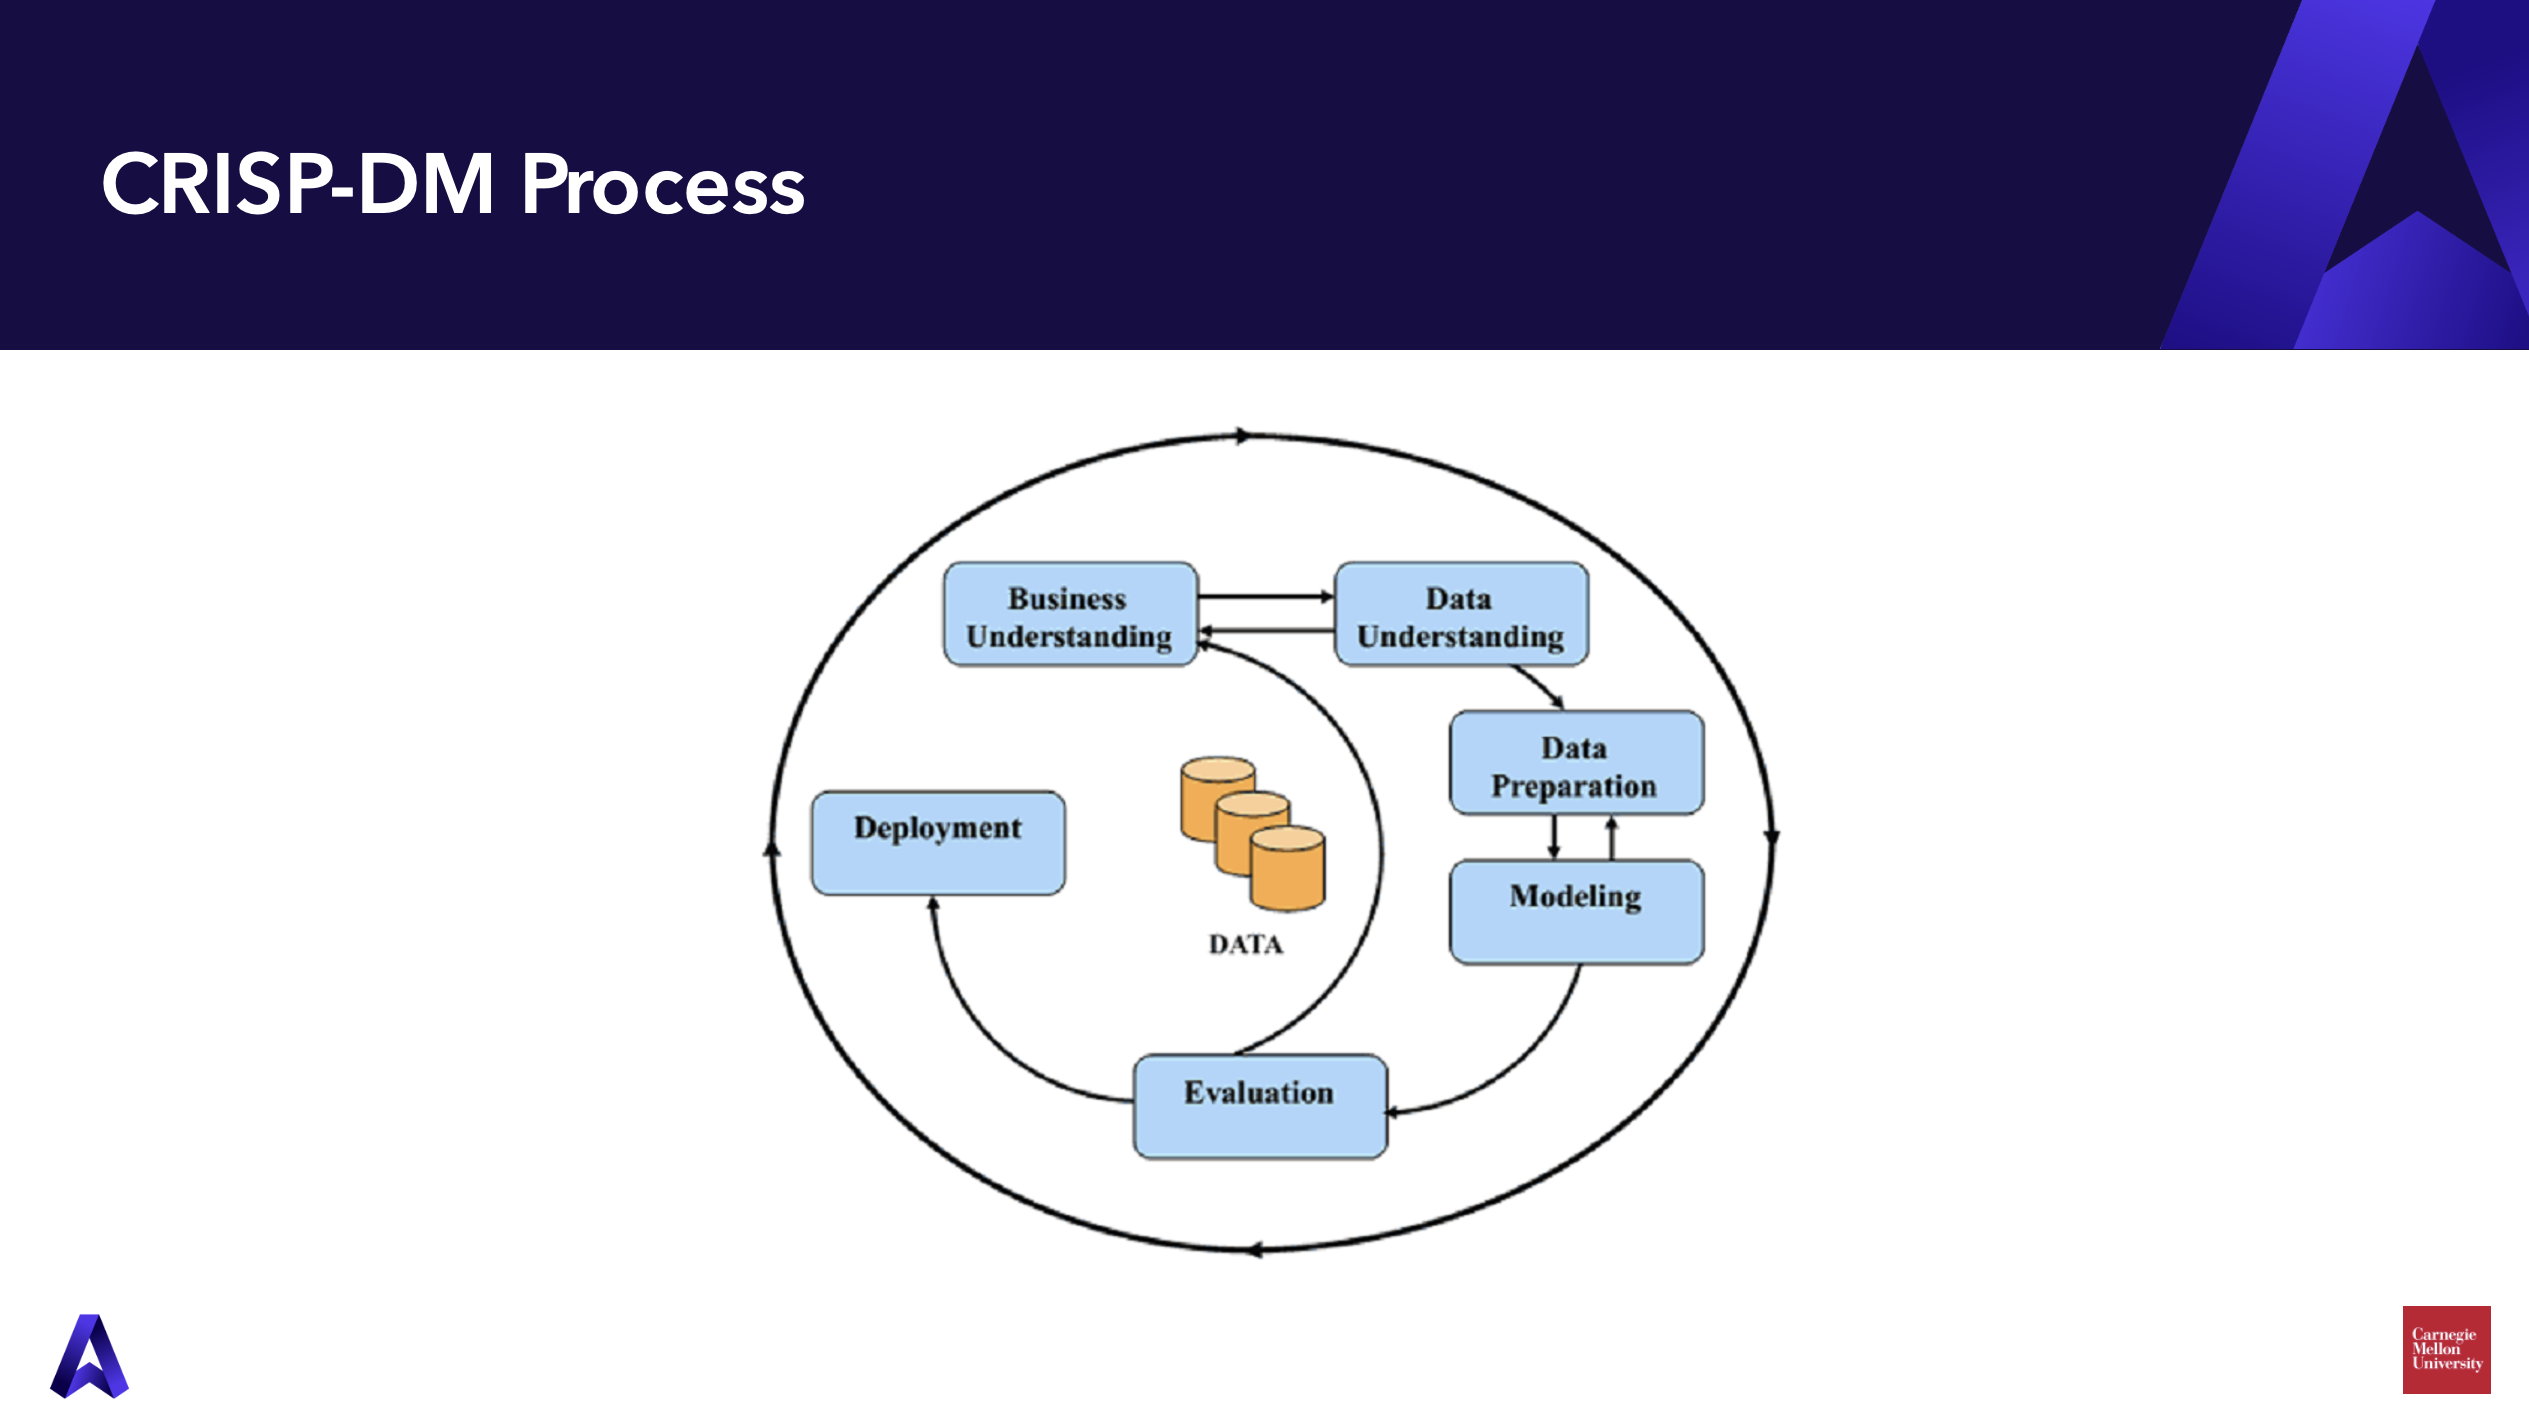 An illustration of the six CRISP-DM process phases.